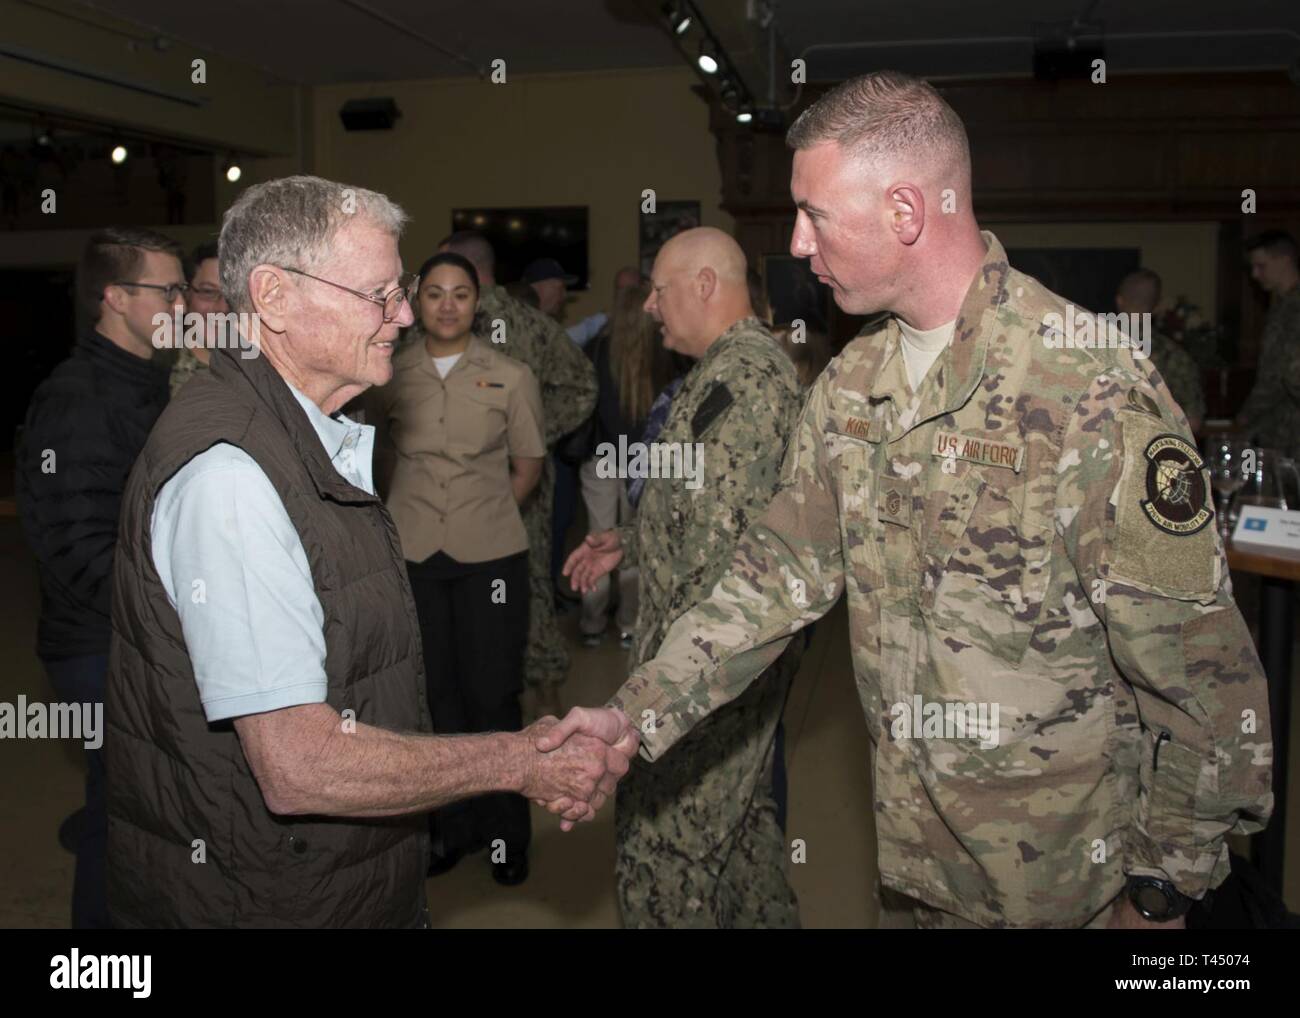 NAVAL STATION ROTA, Spain (February 25, 2019) U.S. Senator (R-OK) James  Inhofe, left, talks with Air Force Master Sgt. Tyler Kost, assigned to  725th Air Mobility Squadron, during a meet and greet